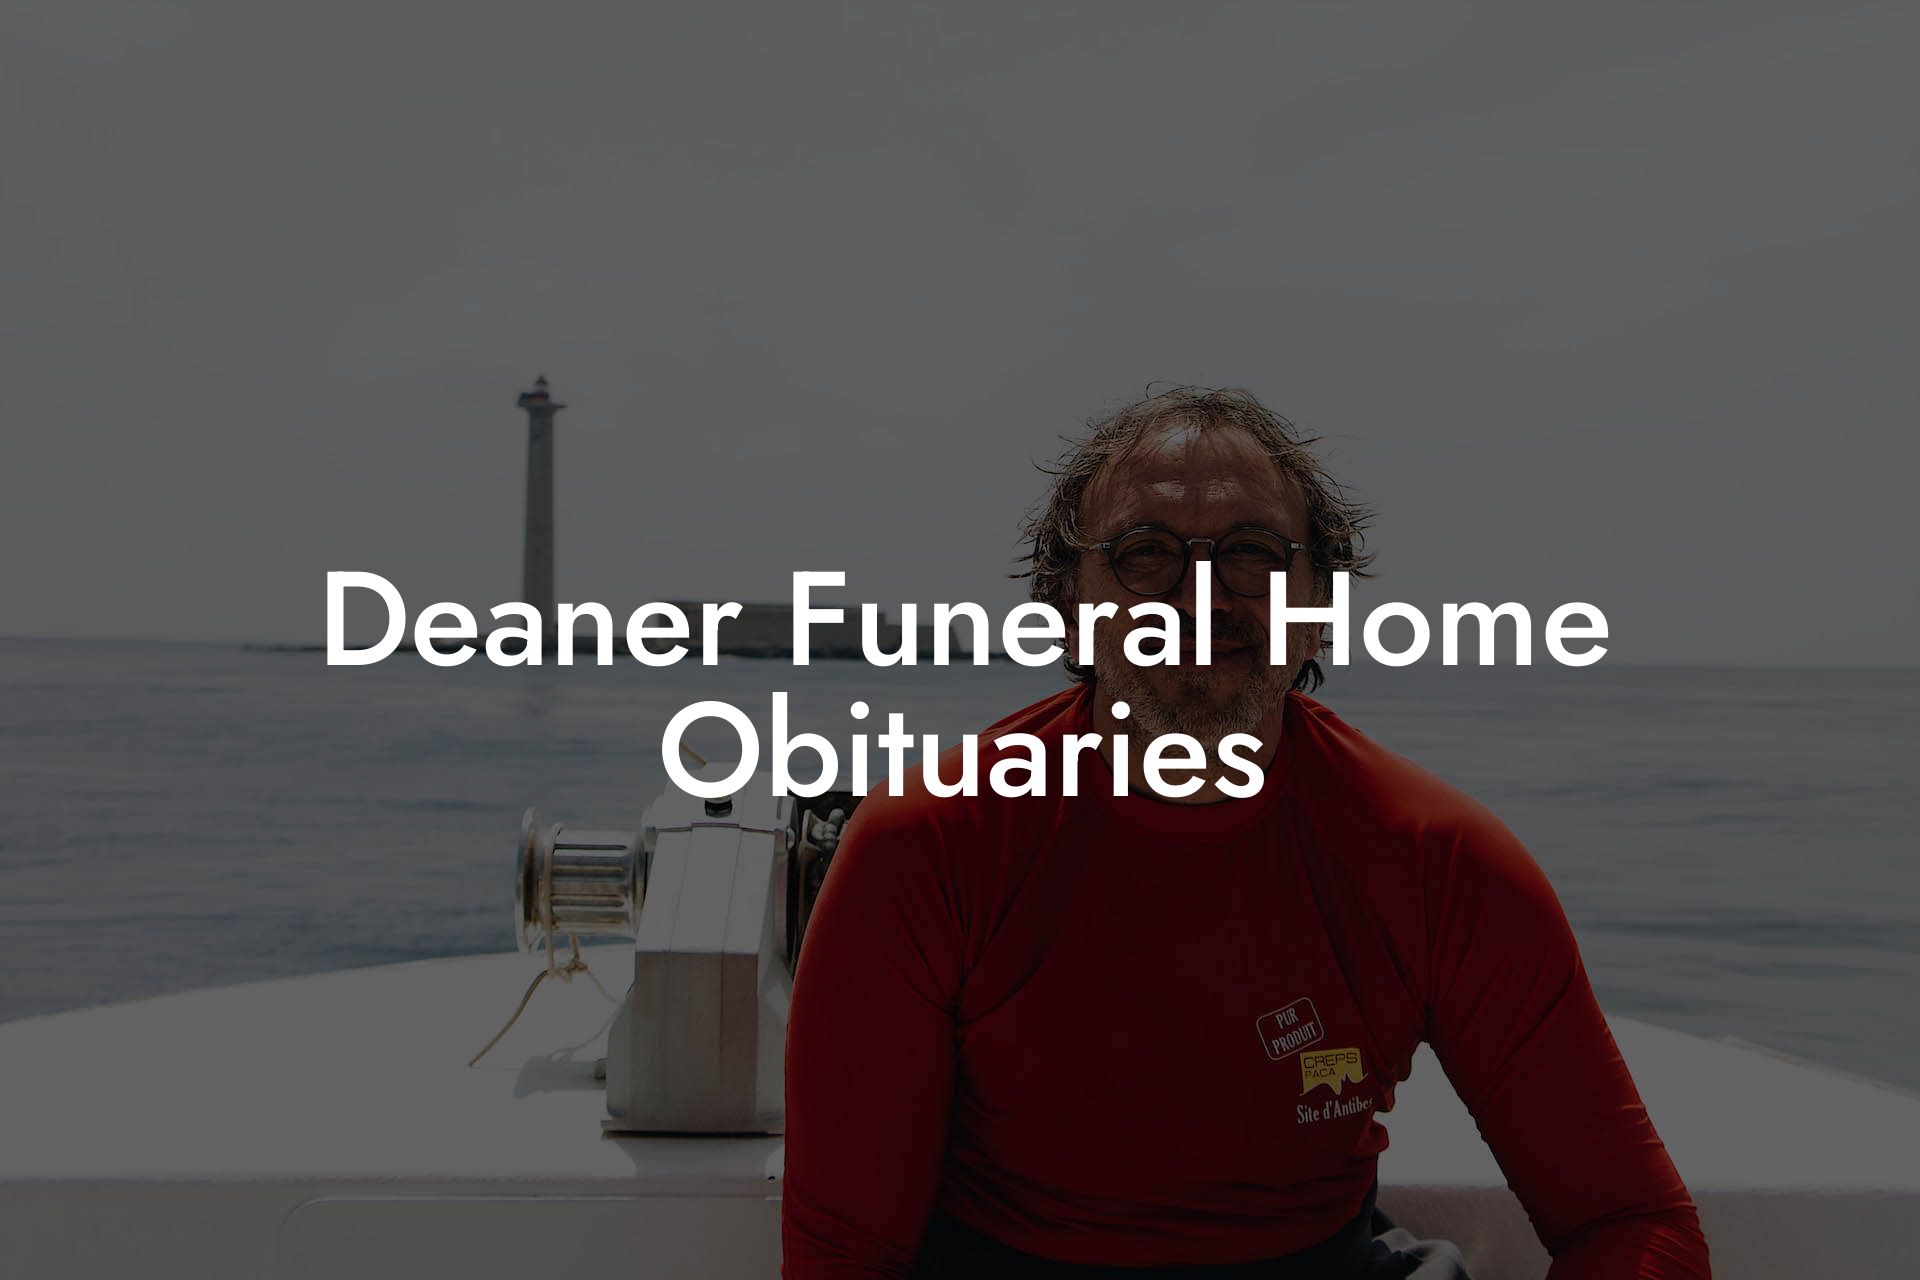 Deaner Funeral Home Obituaries